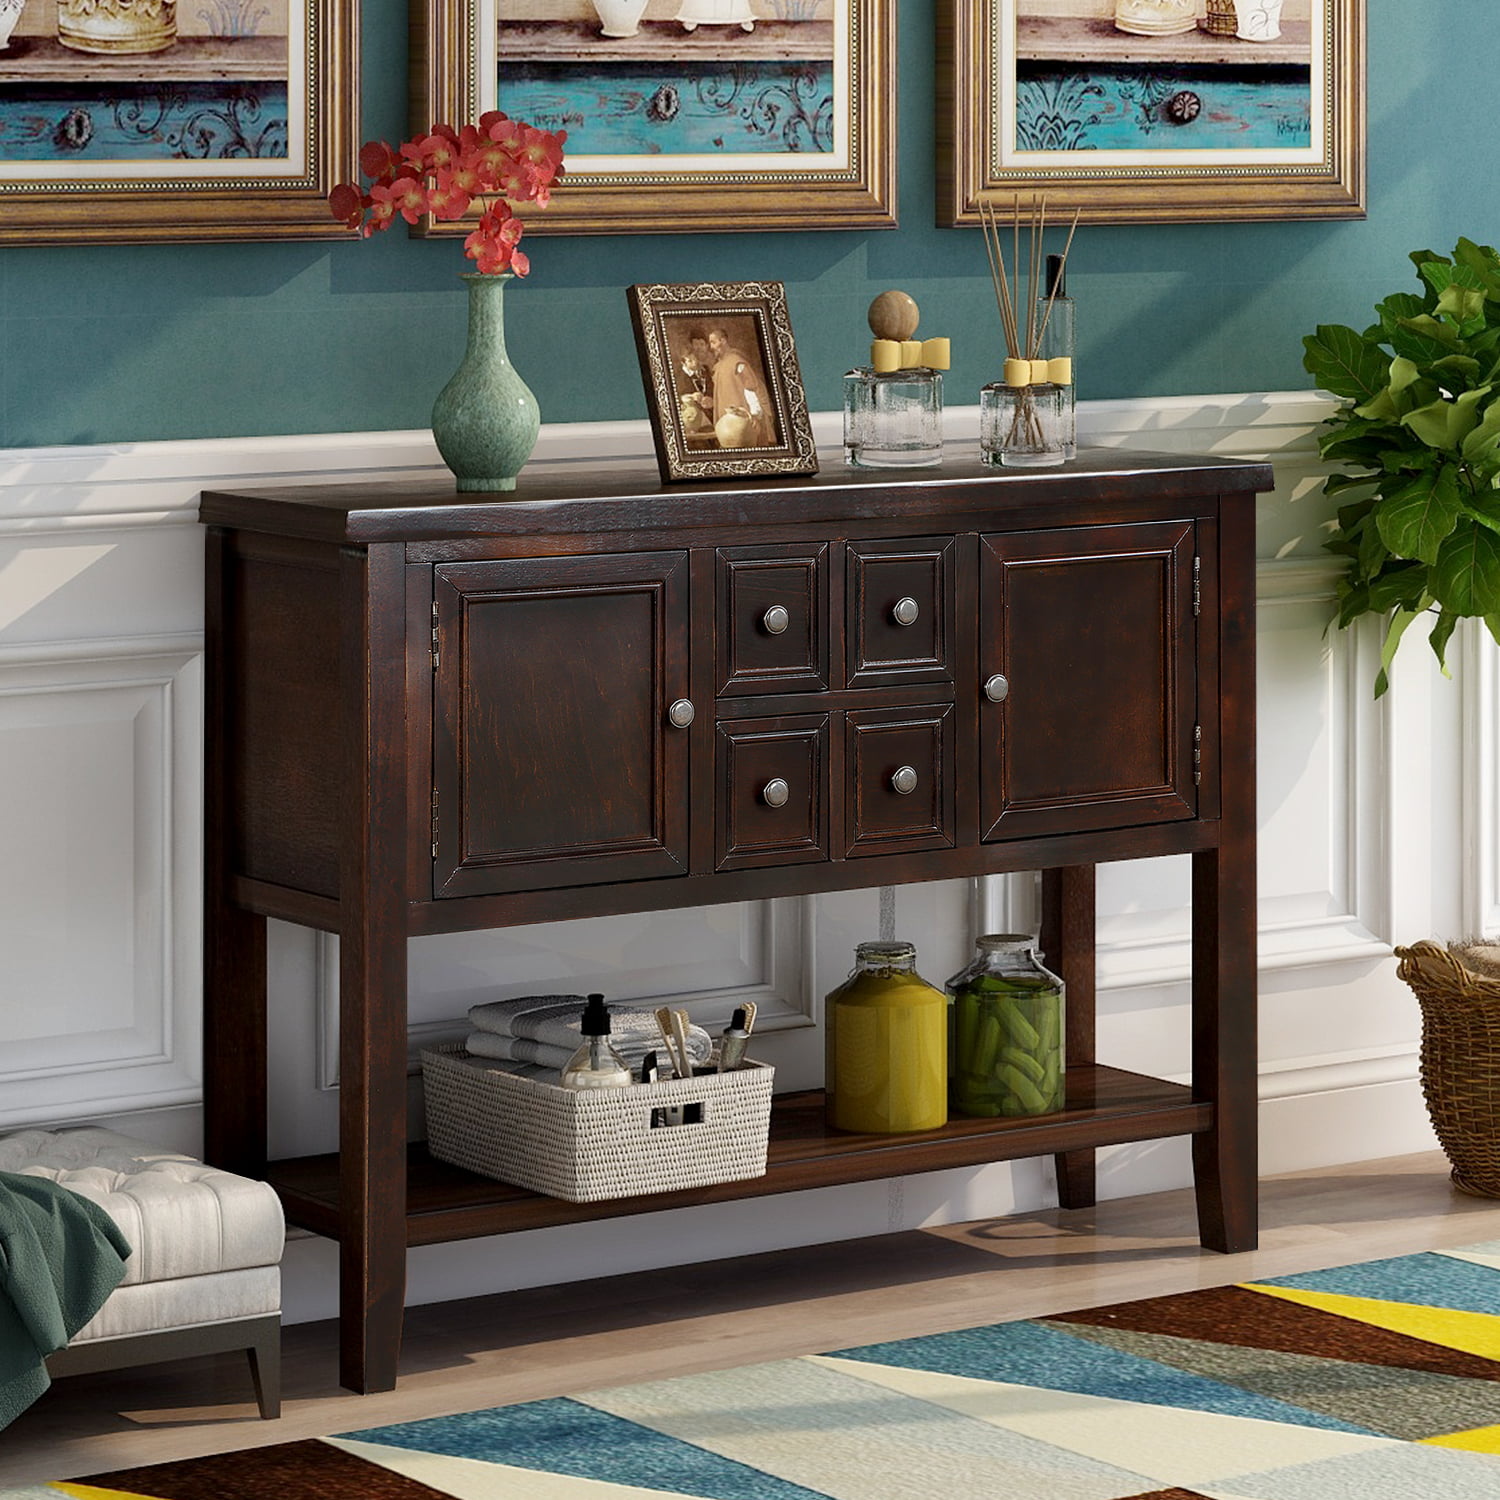 Details about   Antique Hallway Entryway Console Table Sofa Table w/3 Drawers Long Storage Shelf 